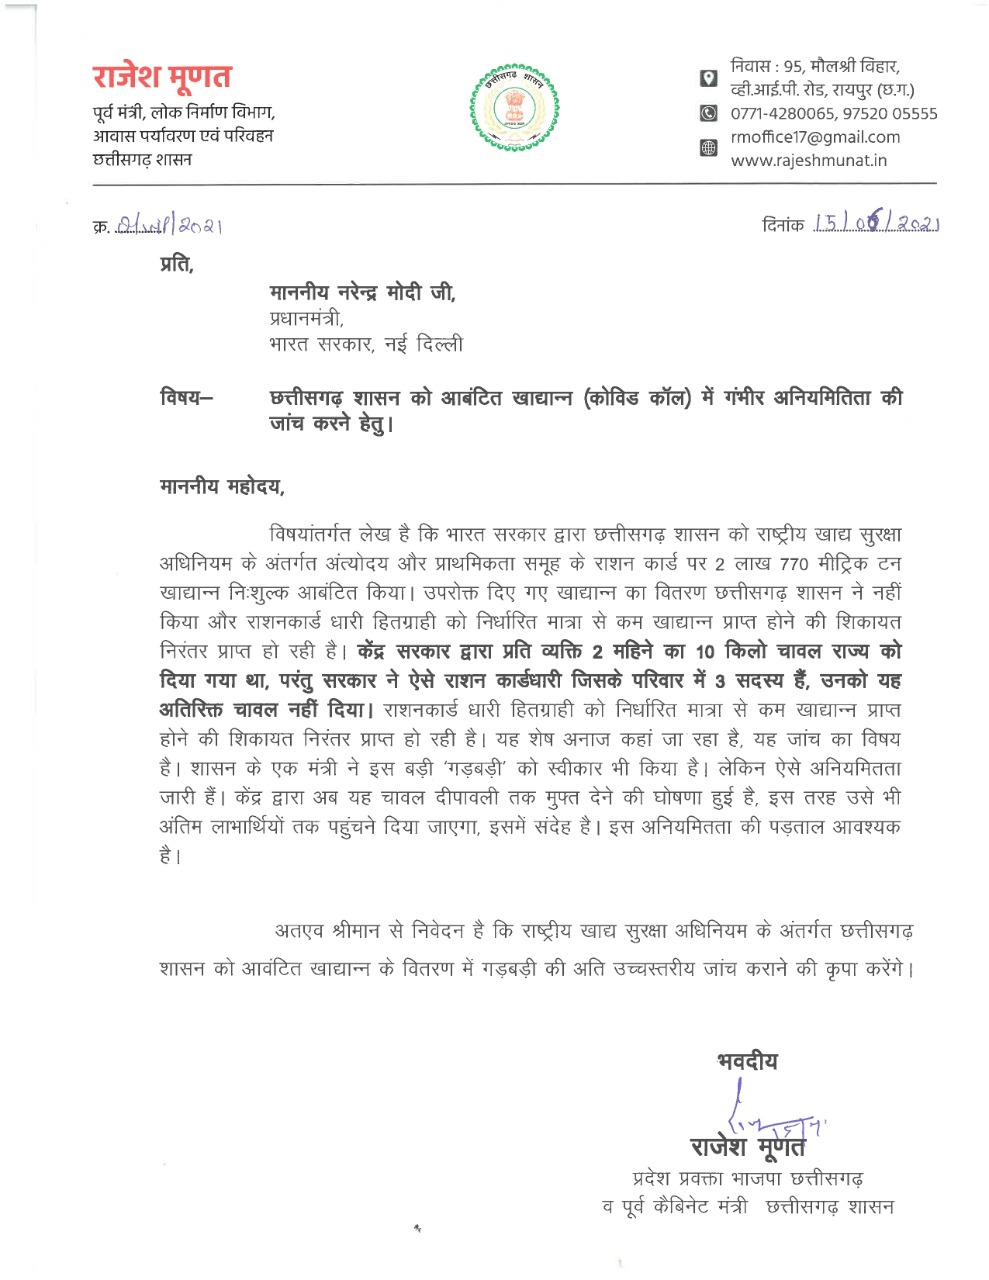 Minister Rajesh Munat wrote a letter to PM